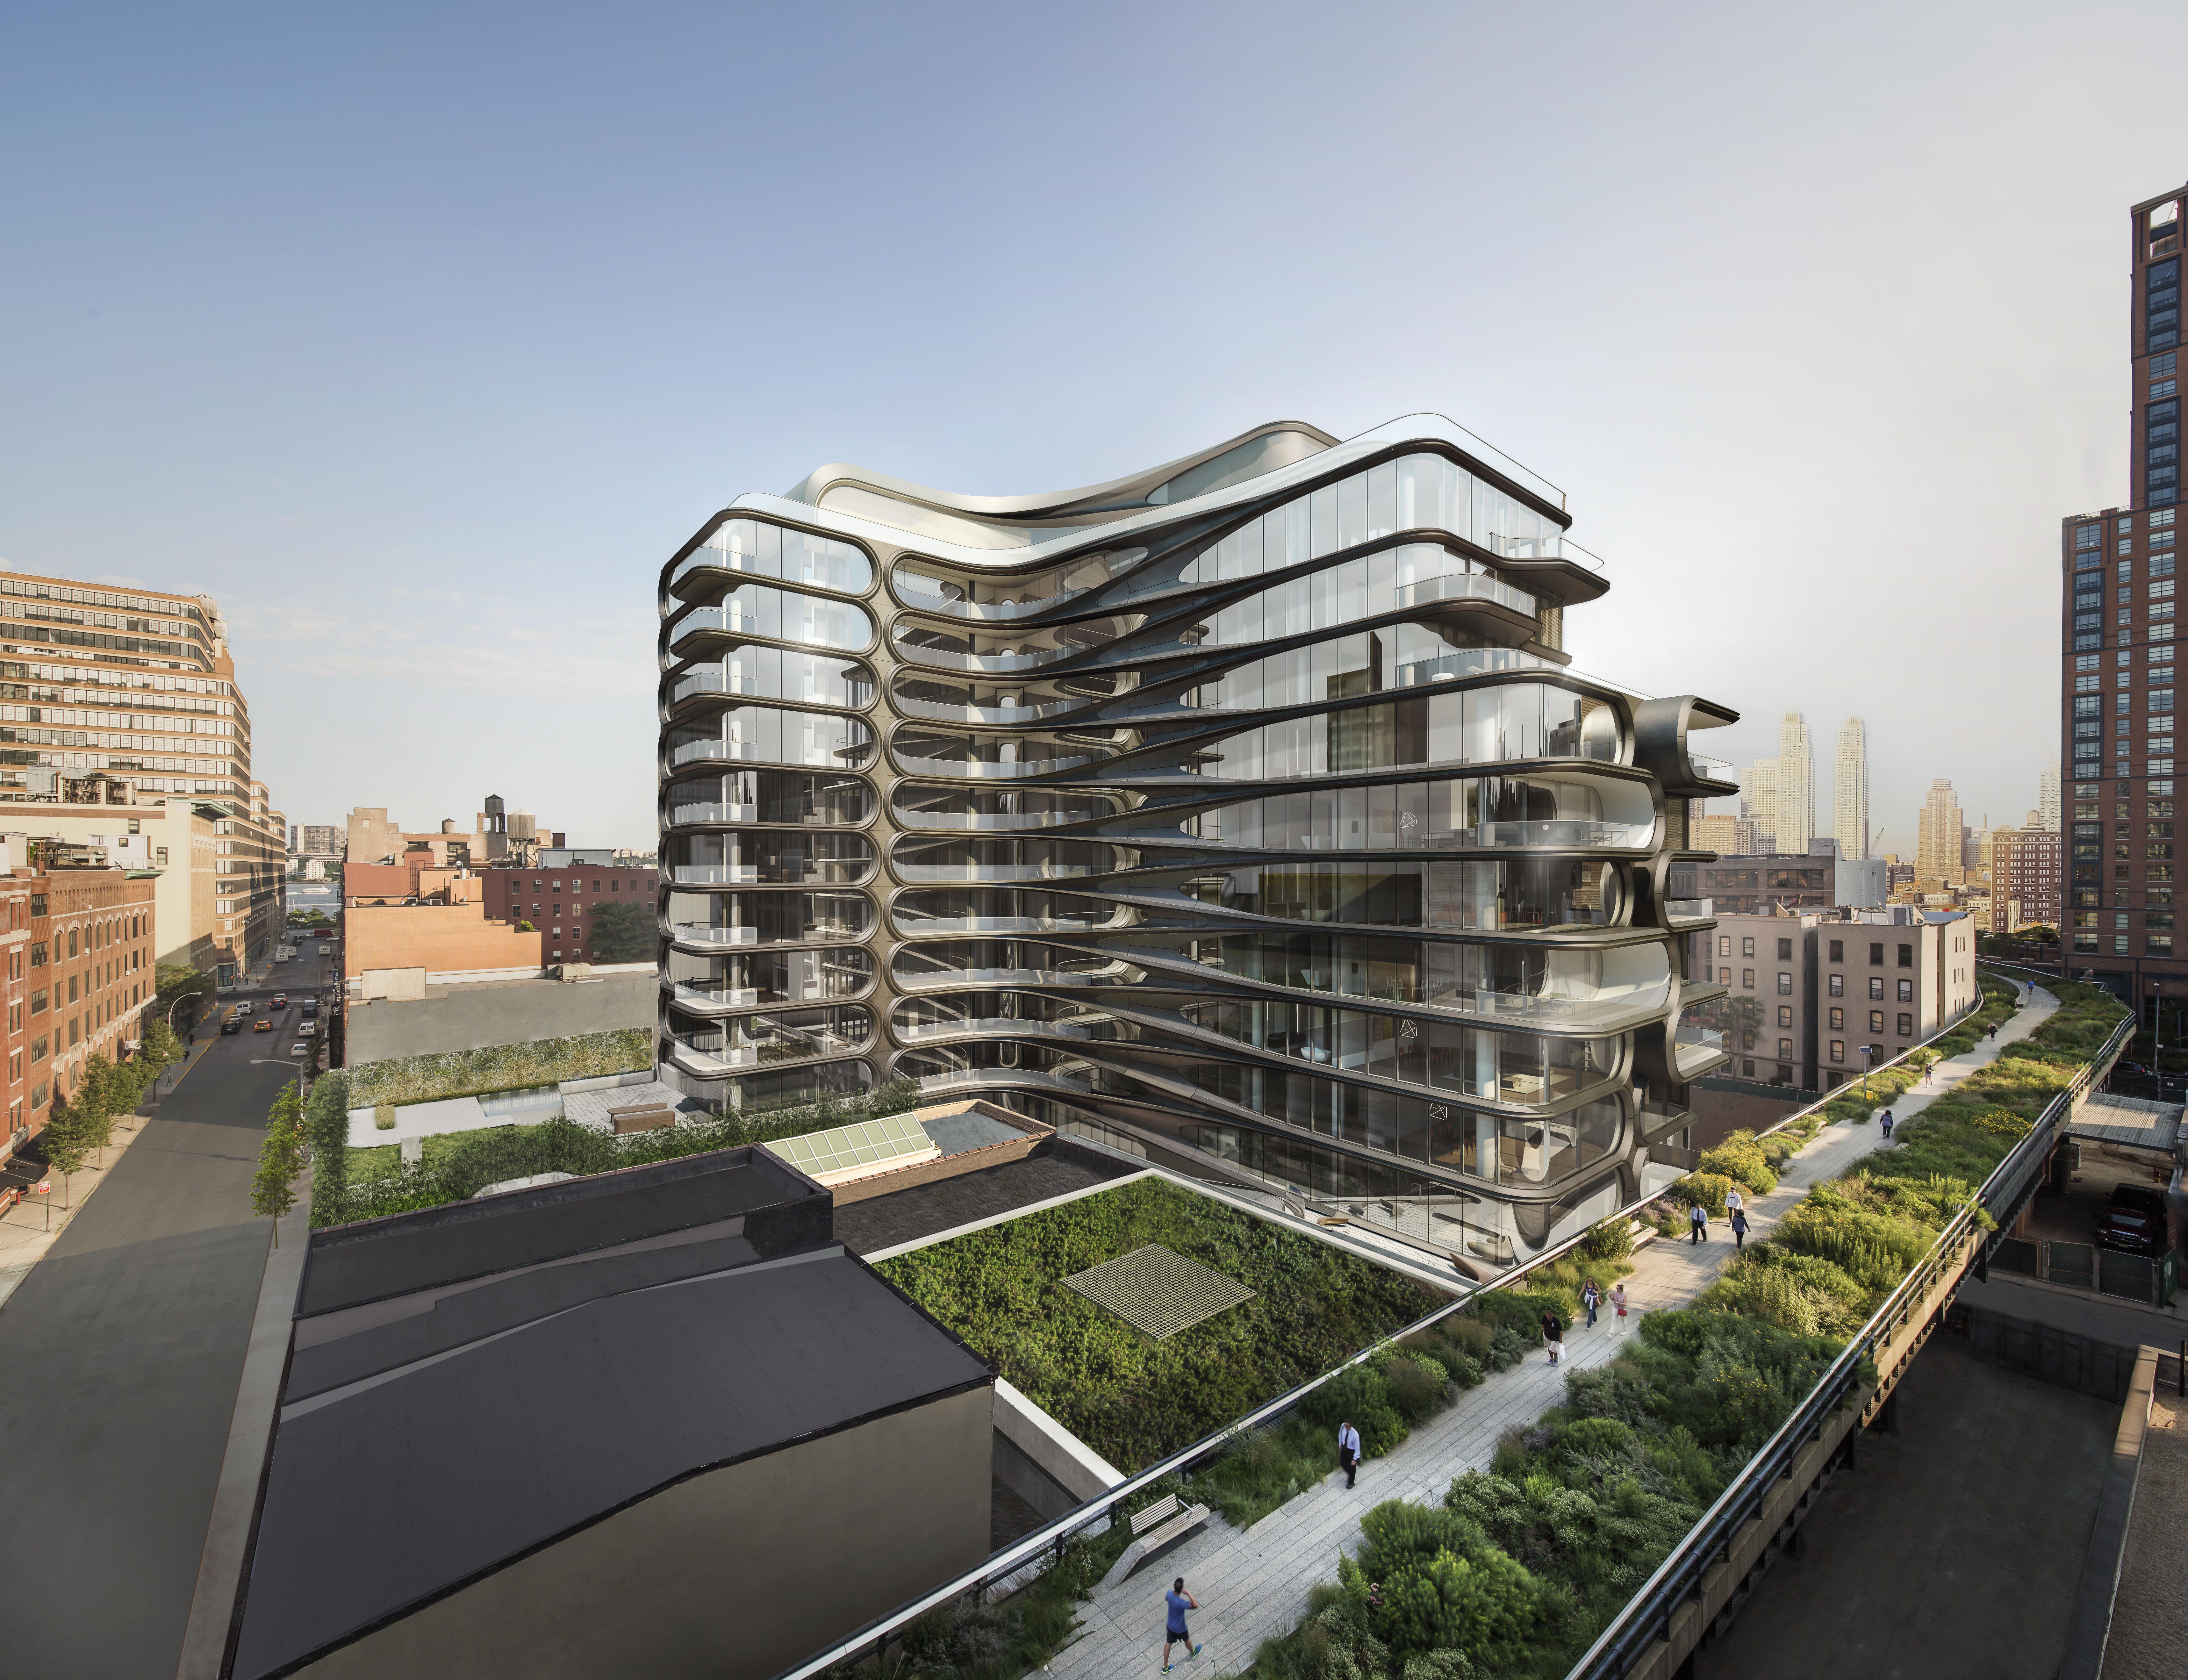 Zaha Hadid Nyc Building Pete Davidson And Ariana Grande S Apartment On The High Line - roblox condo building